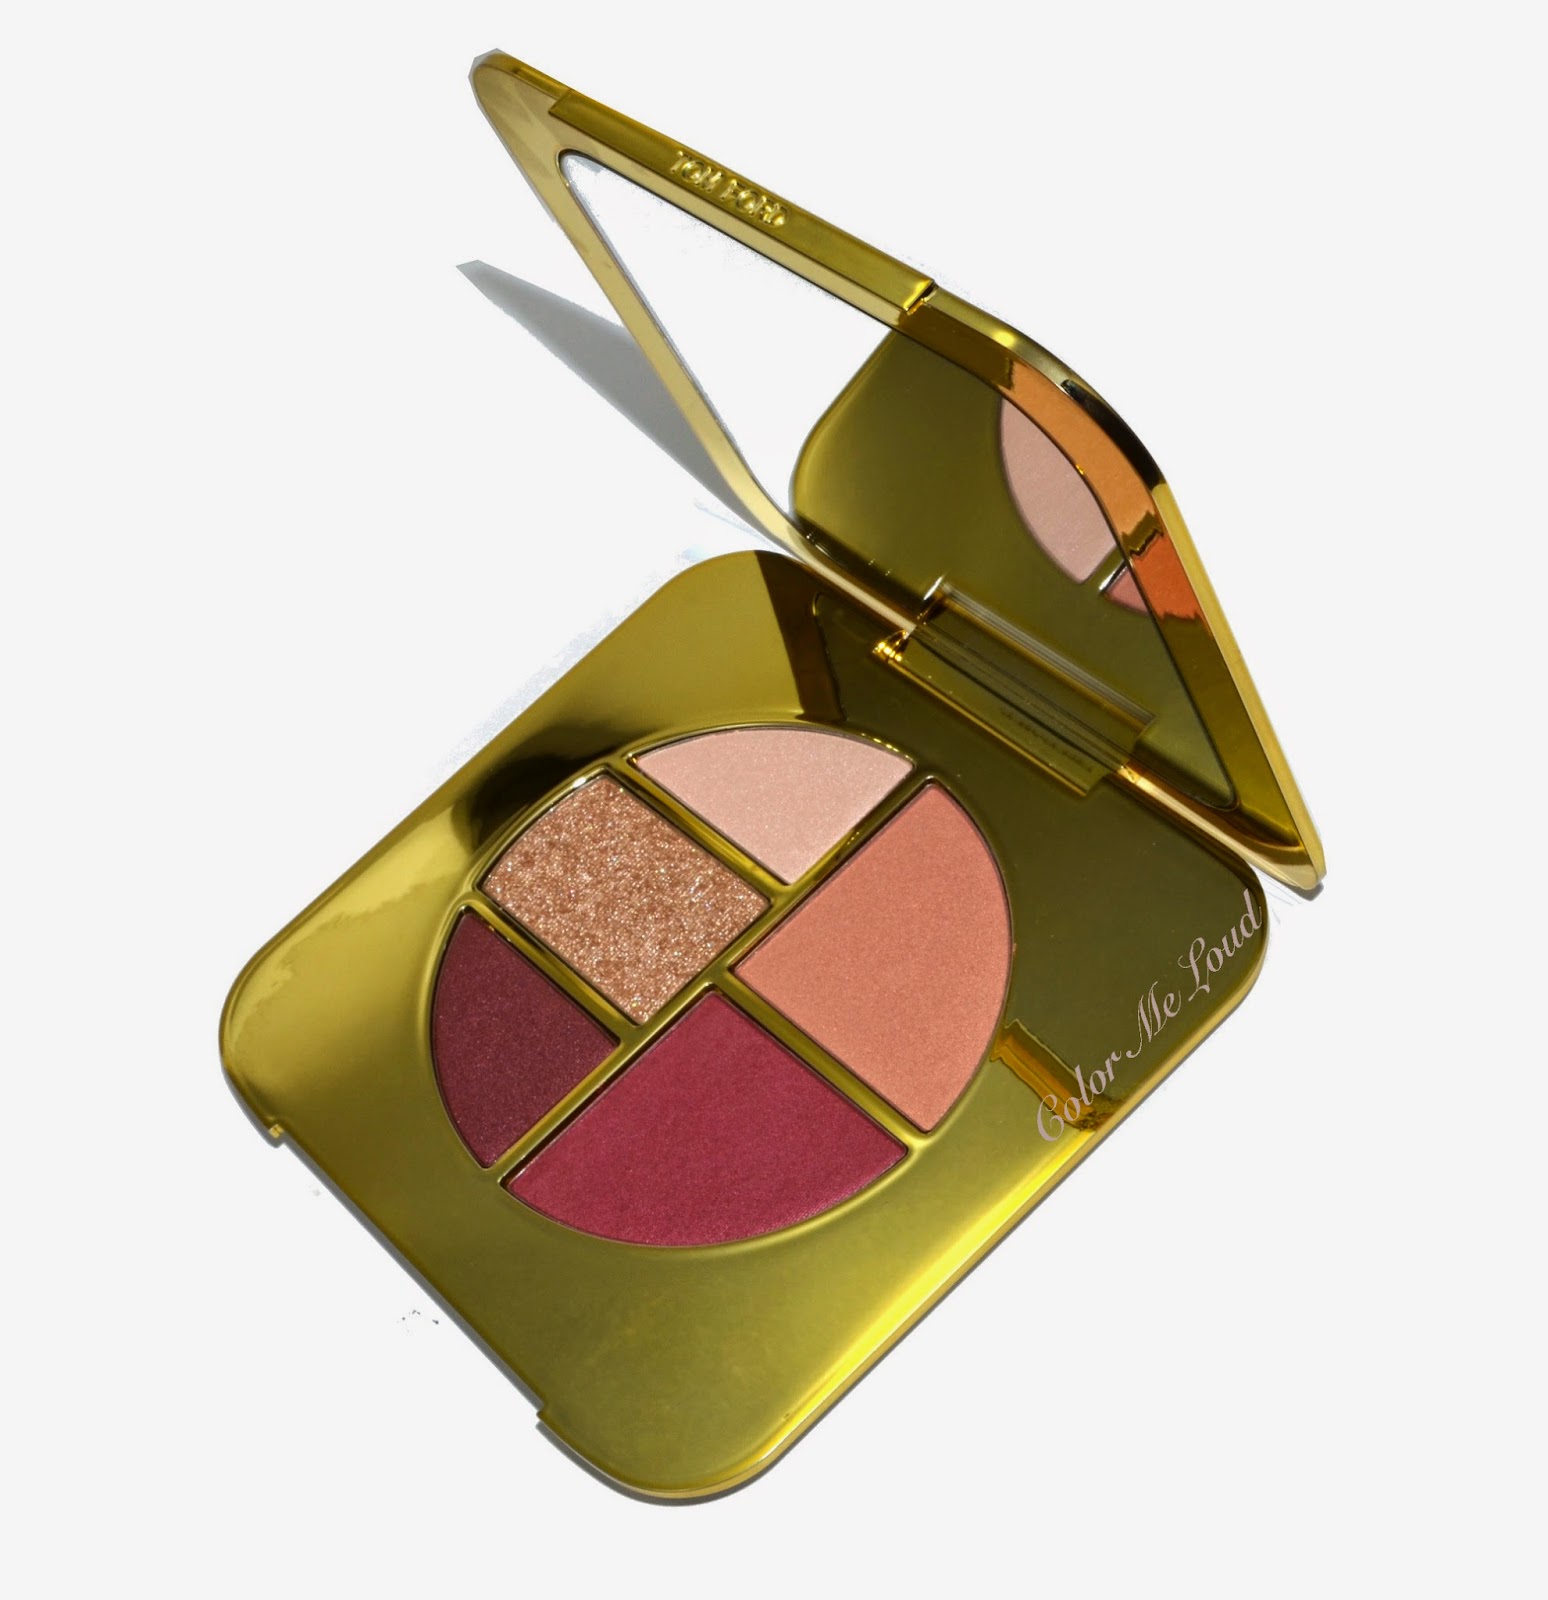 Tom Ford Eye and Cheek Compact Pink Glow for Summer 2015, Review, Swatch, Comparison & FOTD